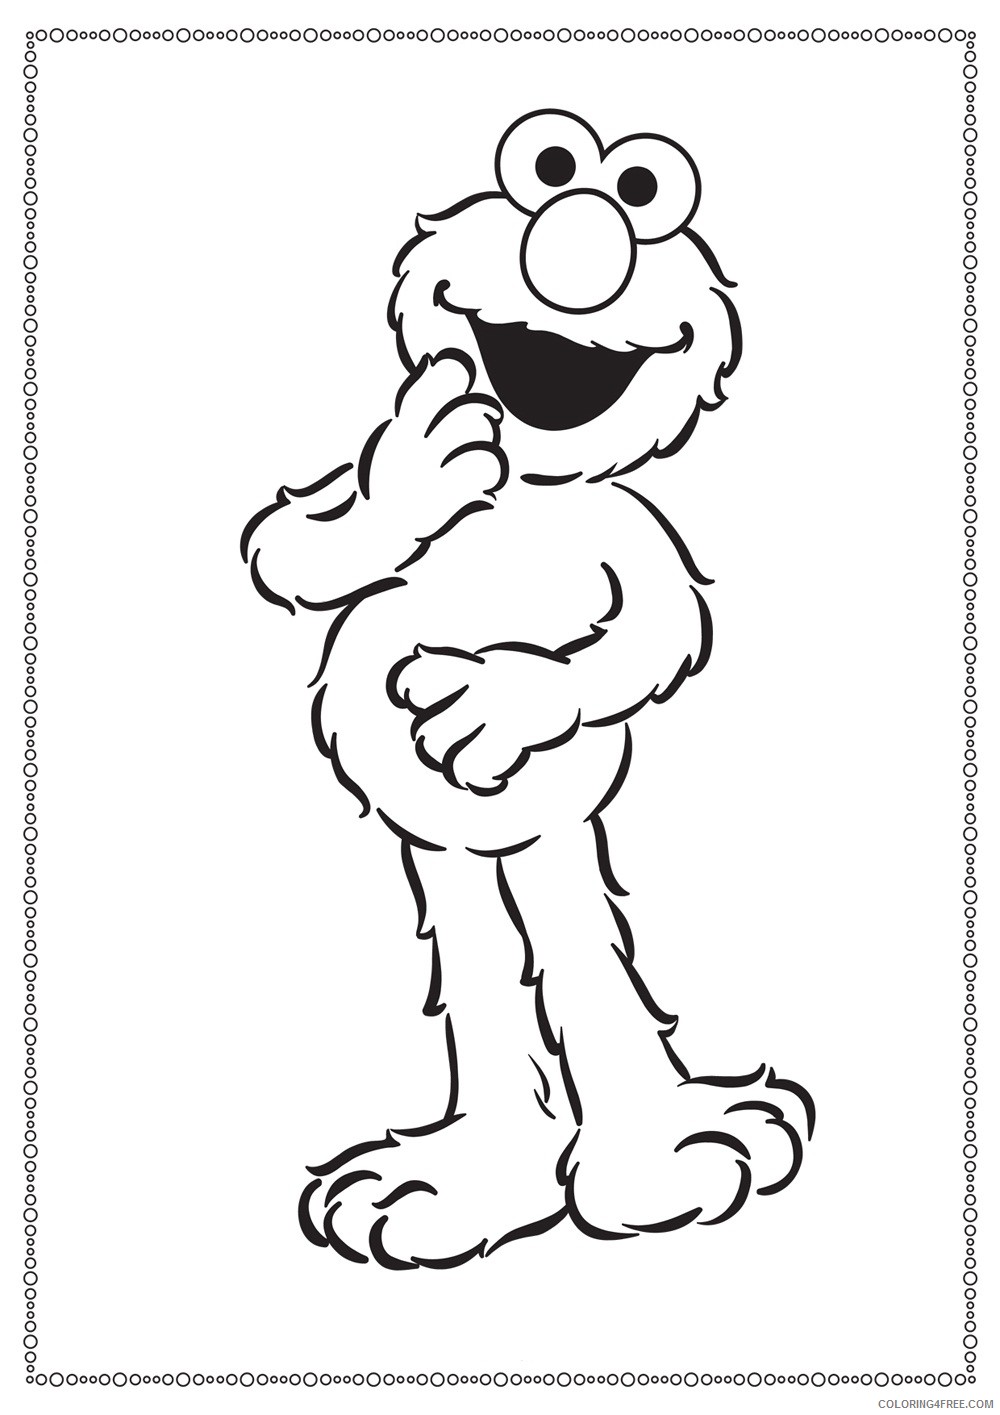 sesame street coloring pages for kids Coloring4free